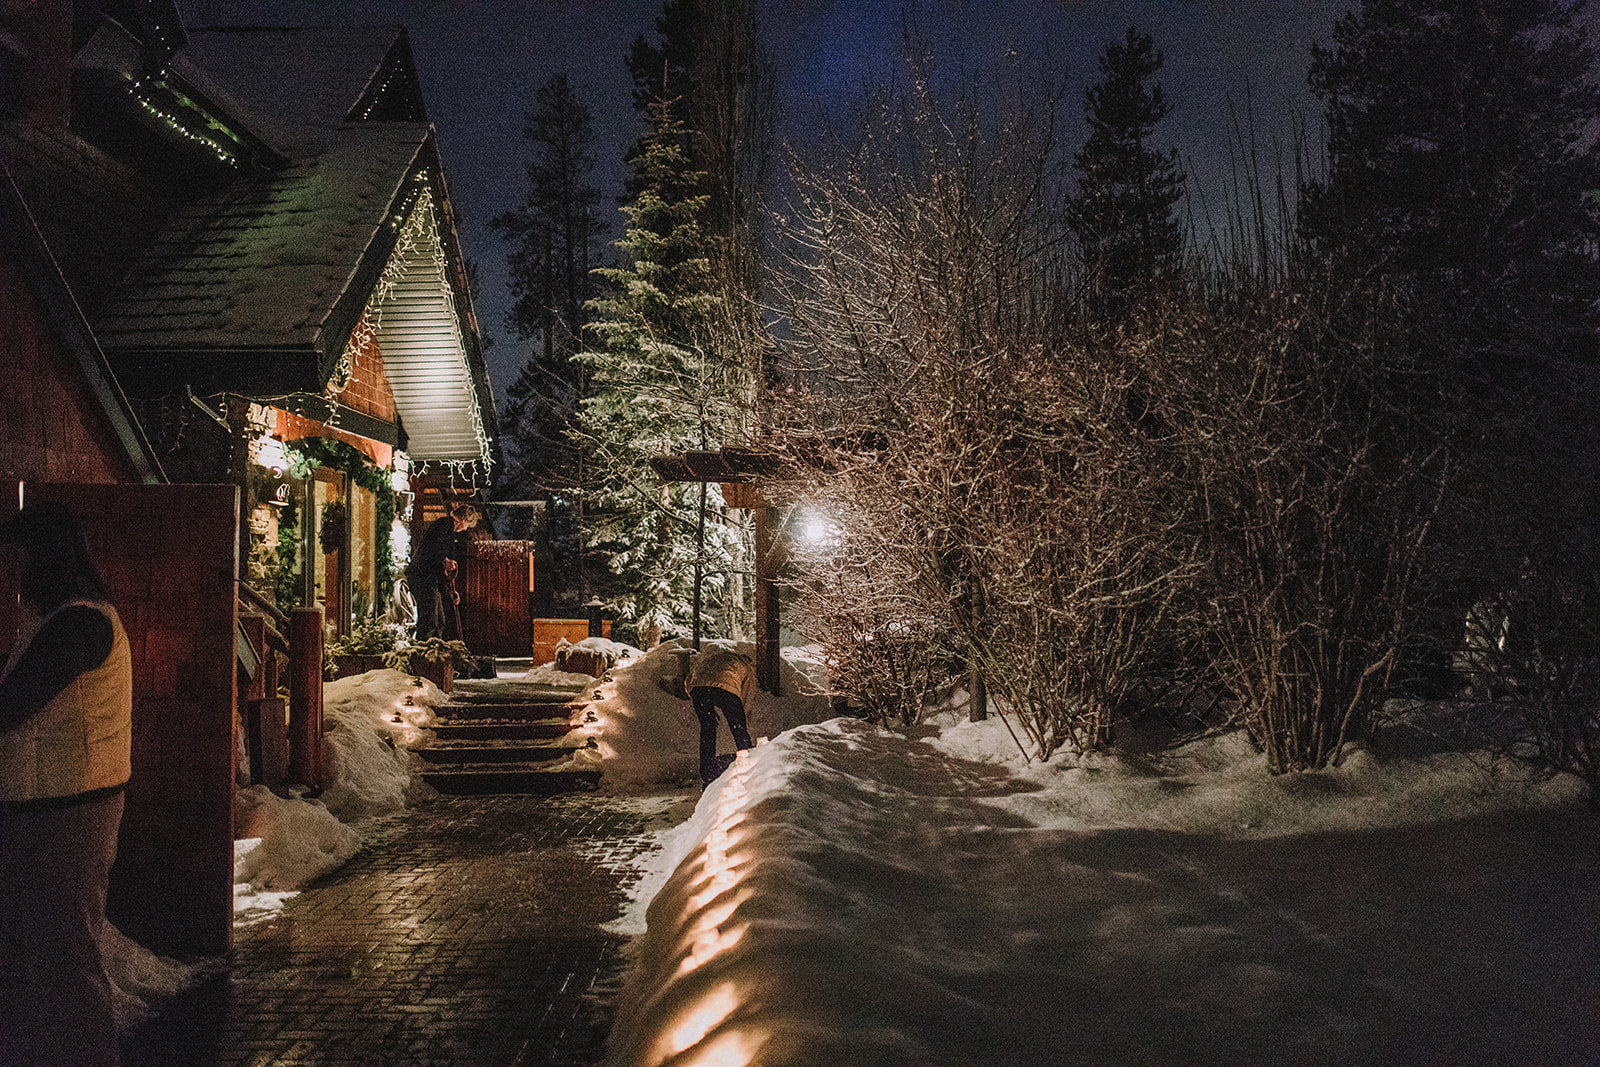 Images of the A Bear and Bison Inn in Canmore, AB